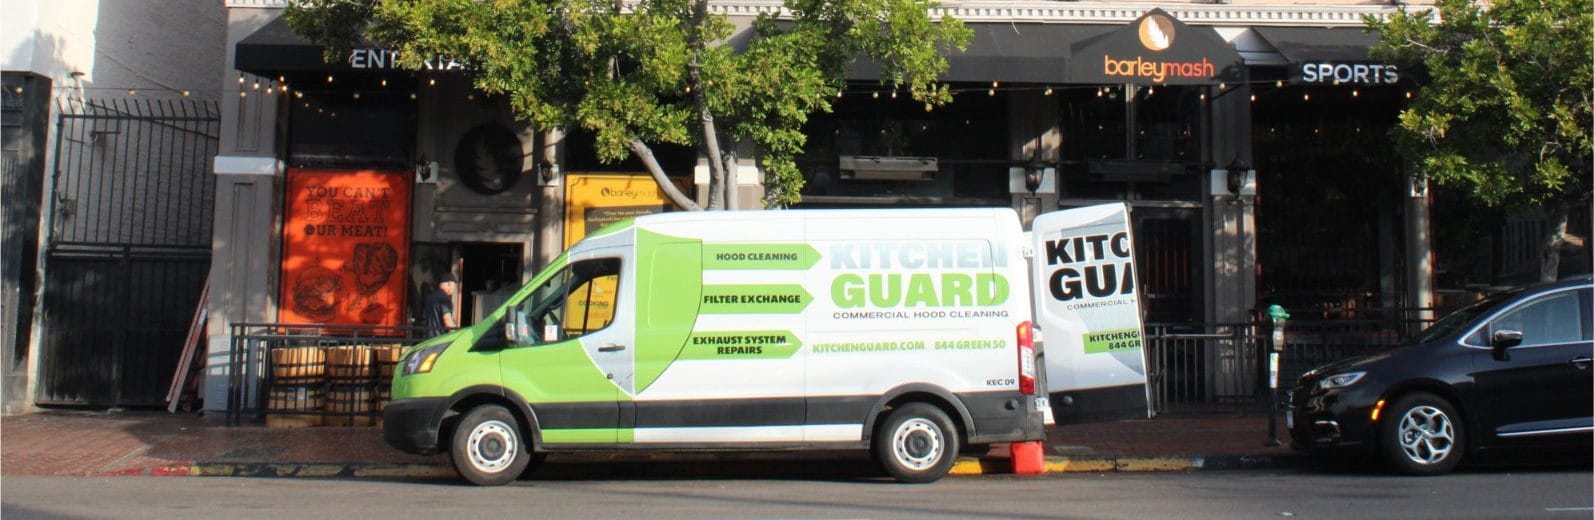 image of Kitchen Guard van side view parked on street